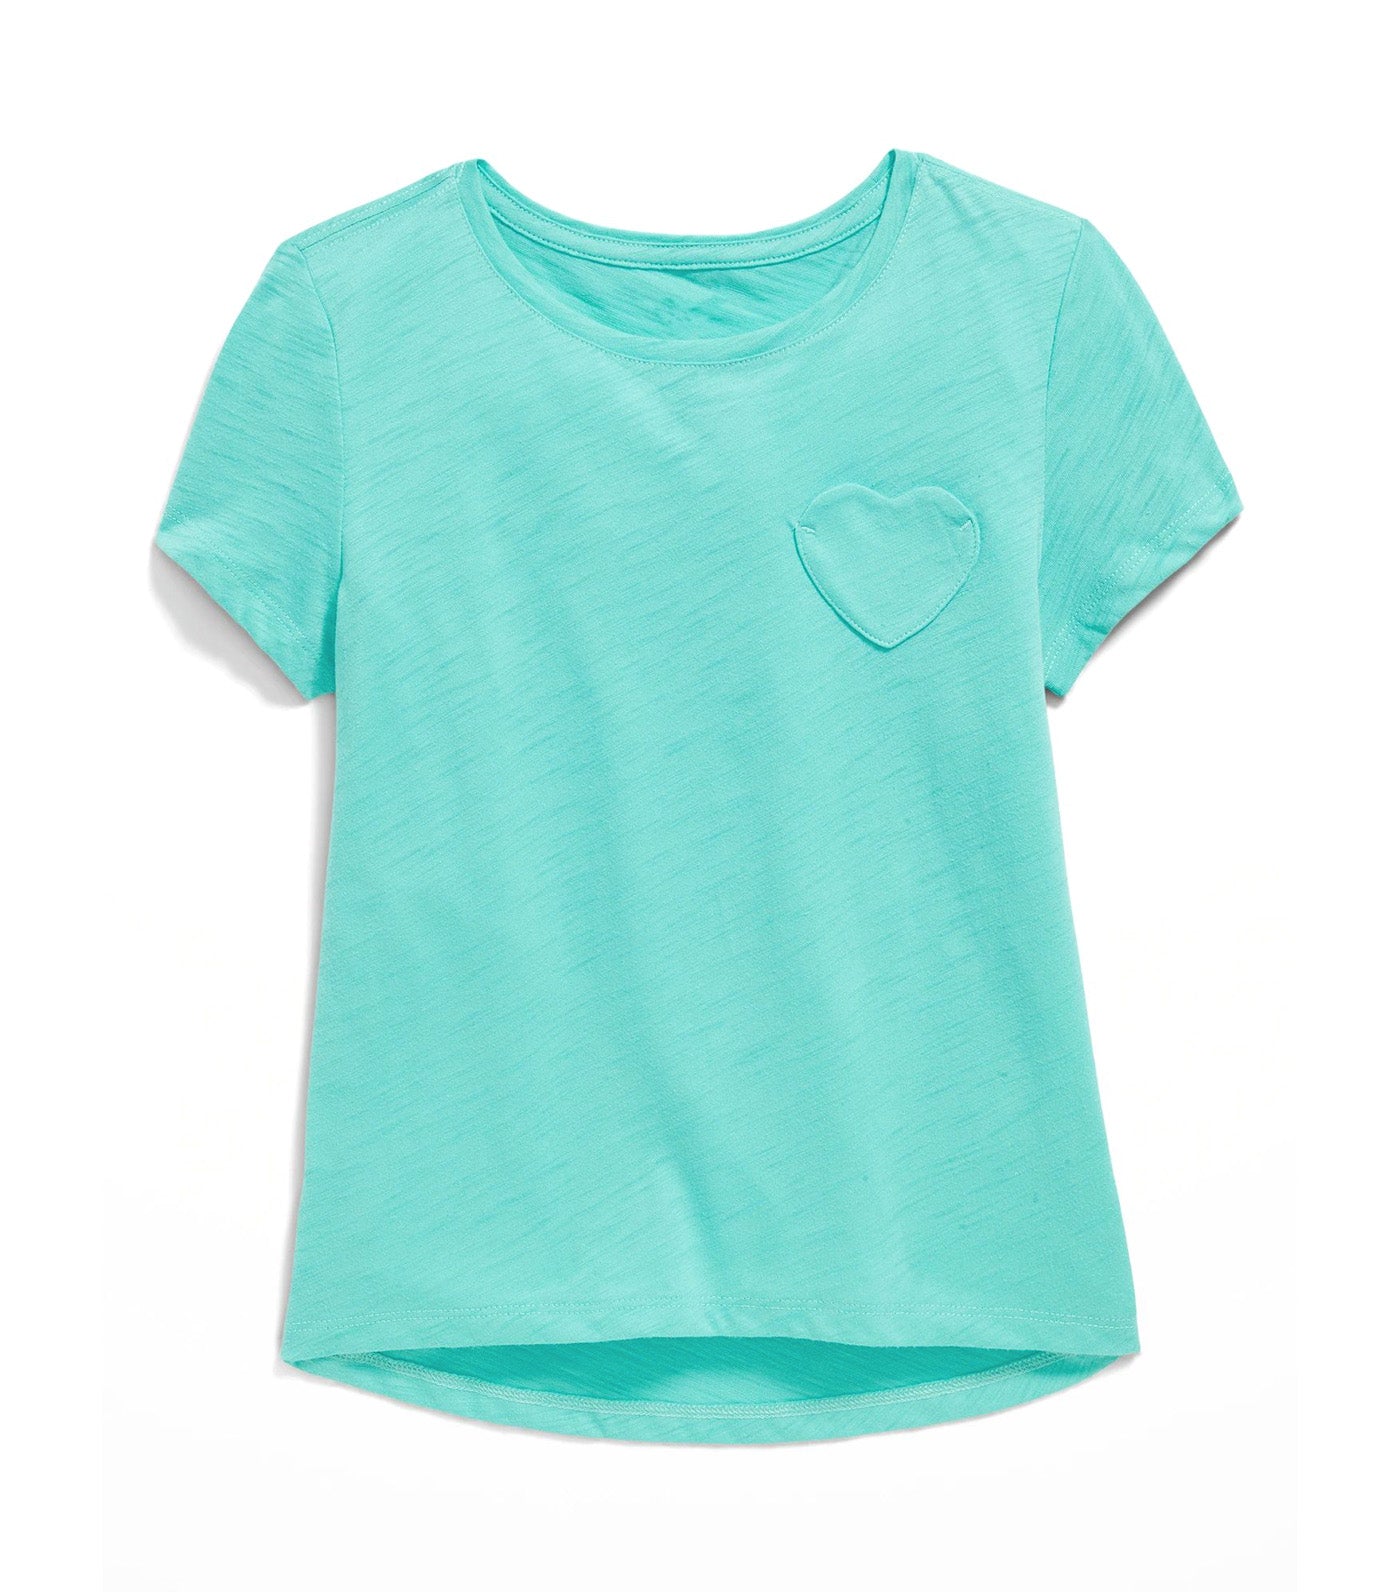 Softest Heart-Pocket T-Shirt for Girls - Tropical Vacation